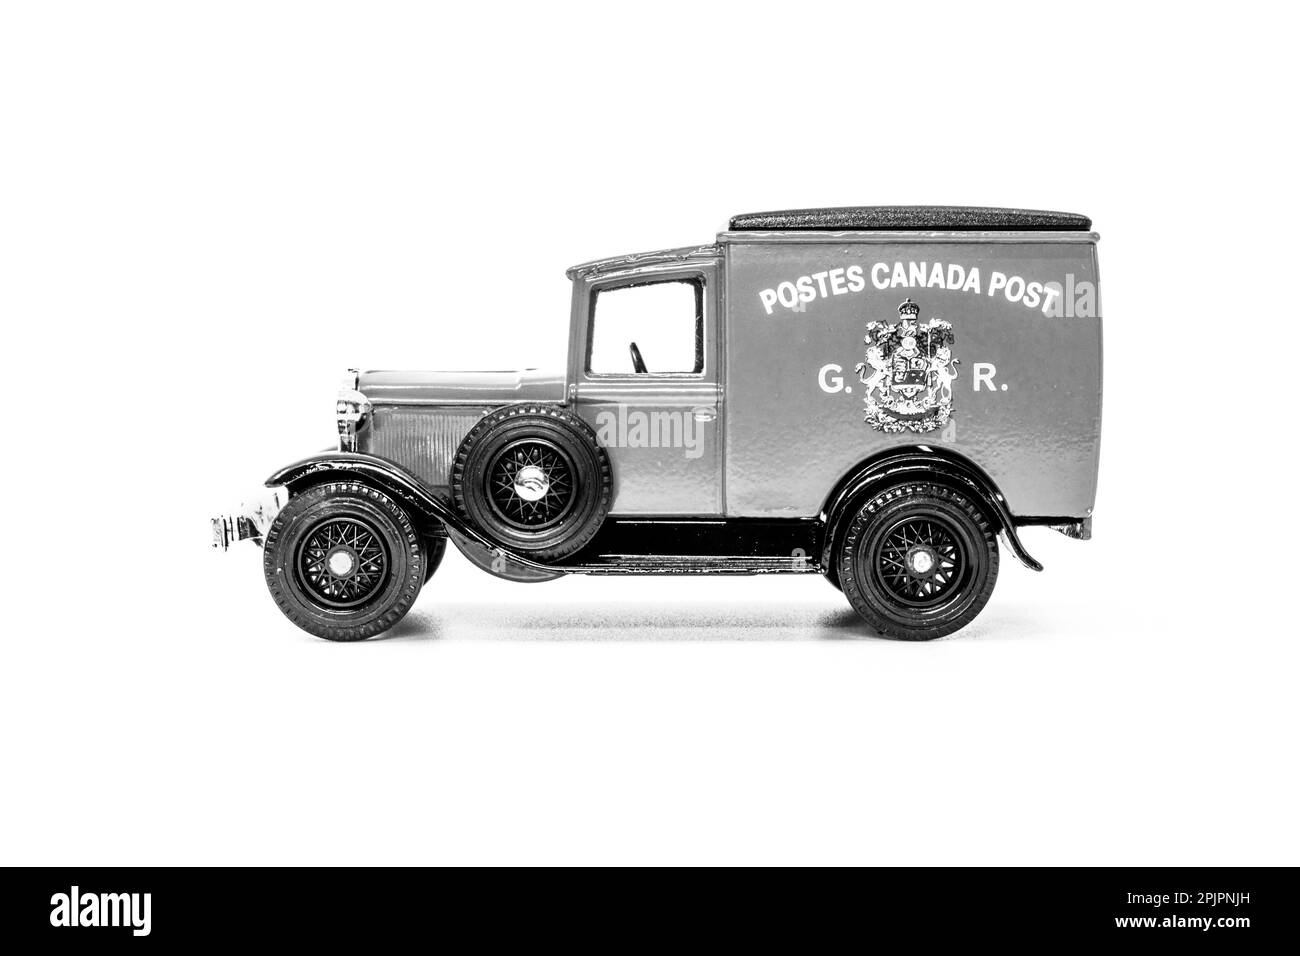 Matchbox Models of Yesteryear Ford Model A, Postes Canada Post van Y-22 1930 Stock Photo